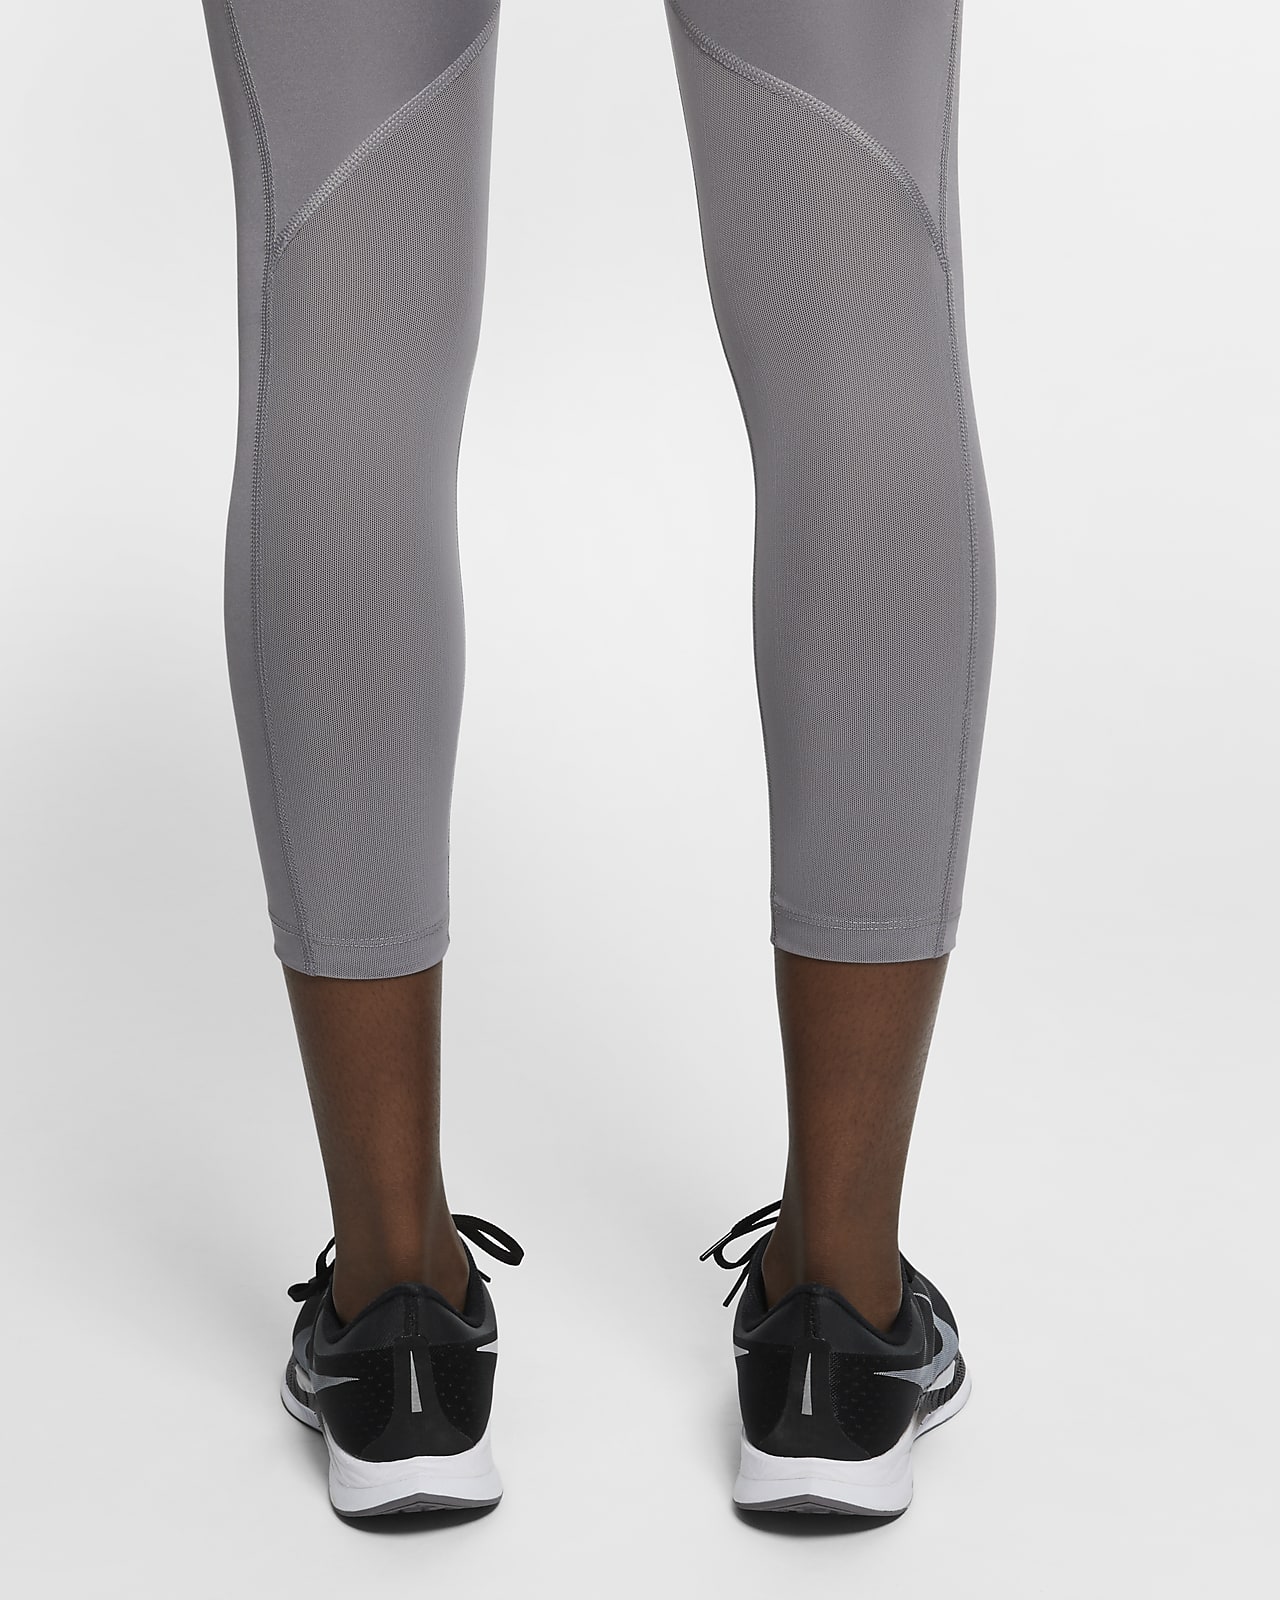 Nike Epic Fast Women's Mid-Rise Crop Running Tights Small CZ9238-010 03  msrp $55